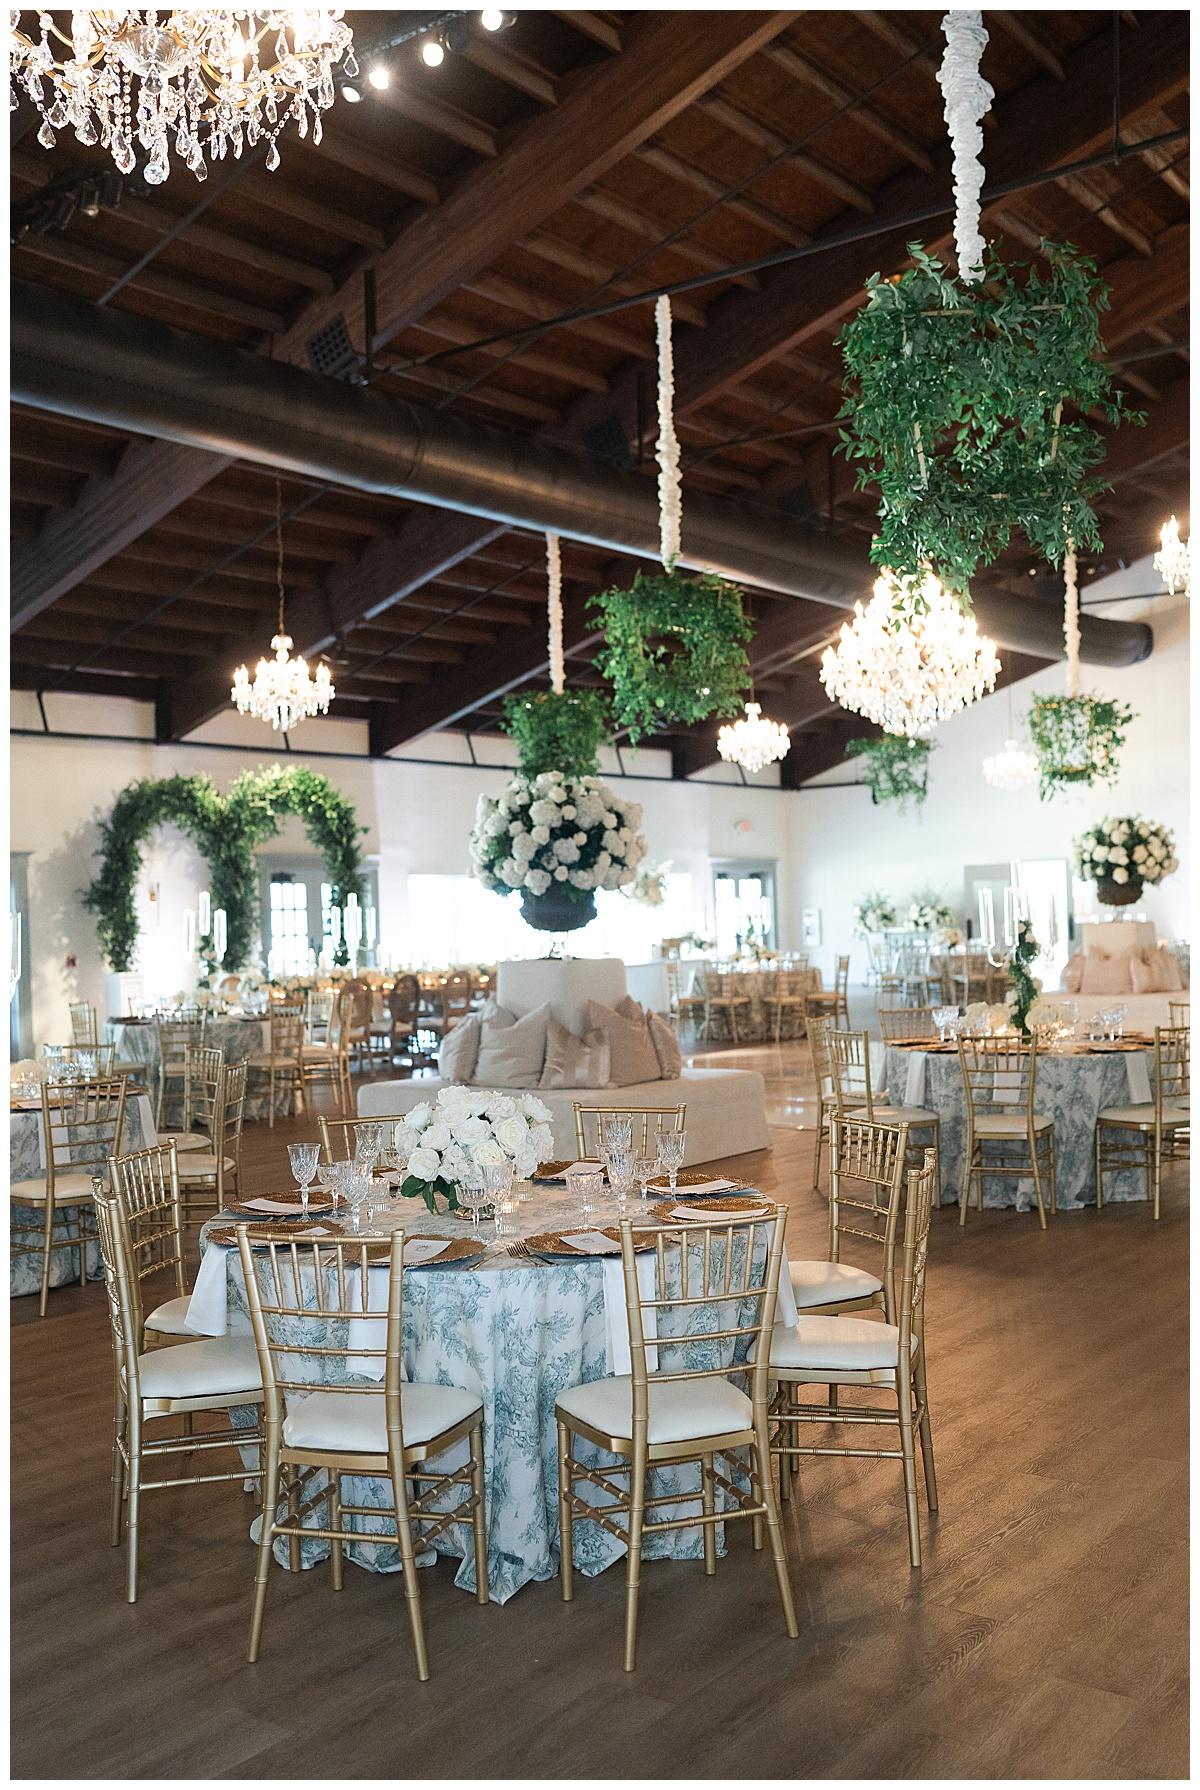 Beautiful floral installations and reception decor at Briscoe Manor